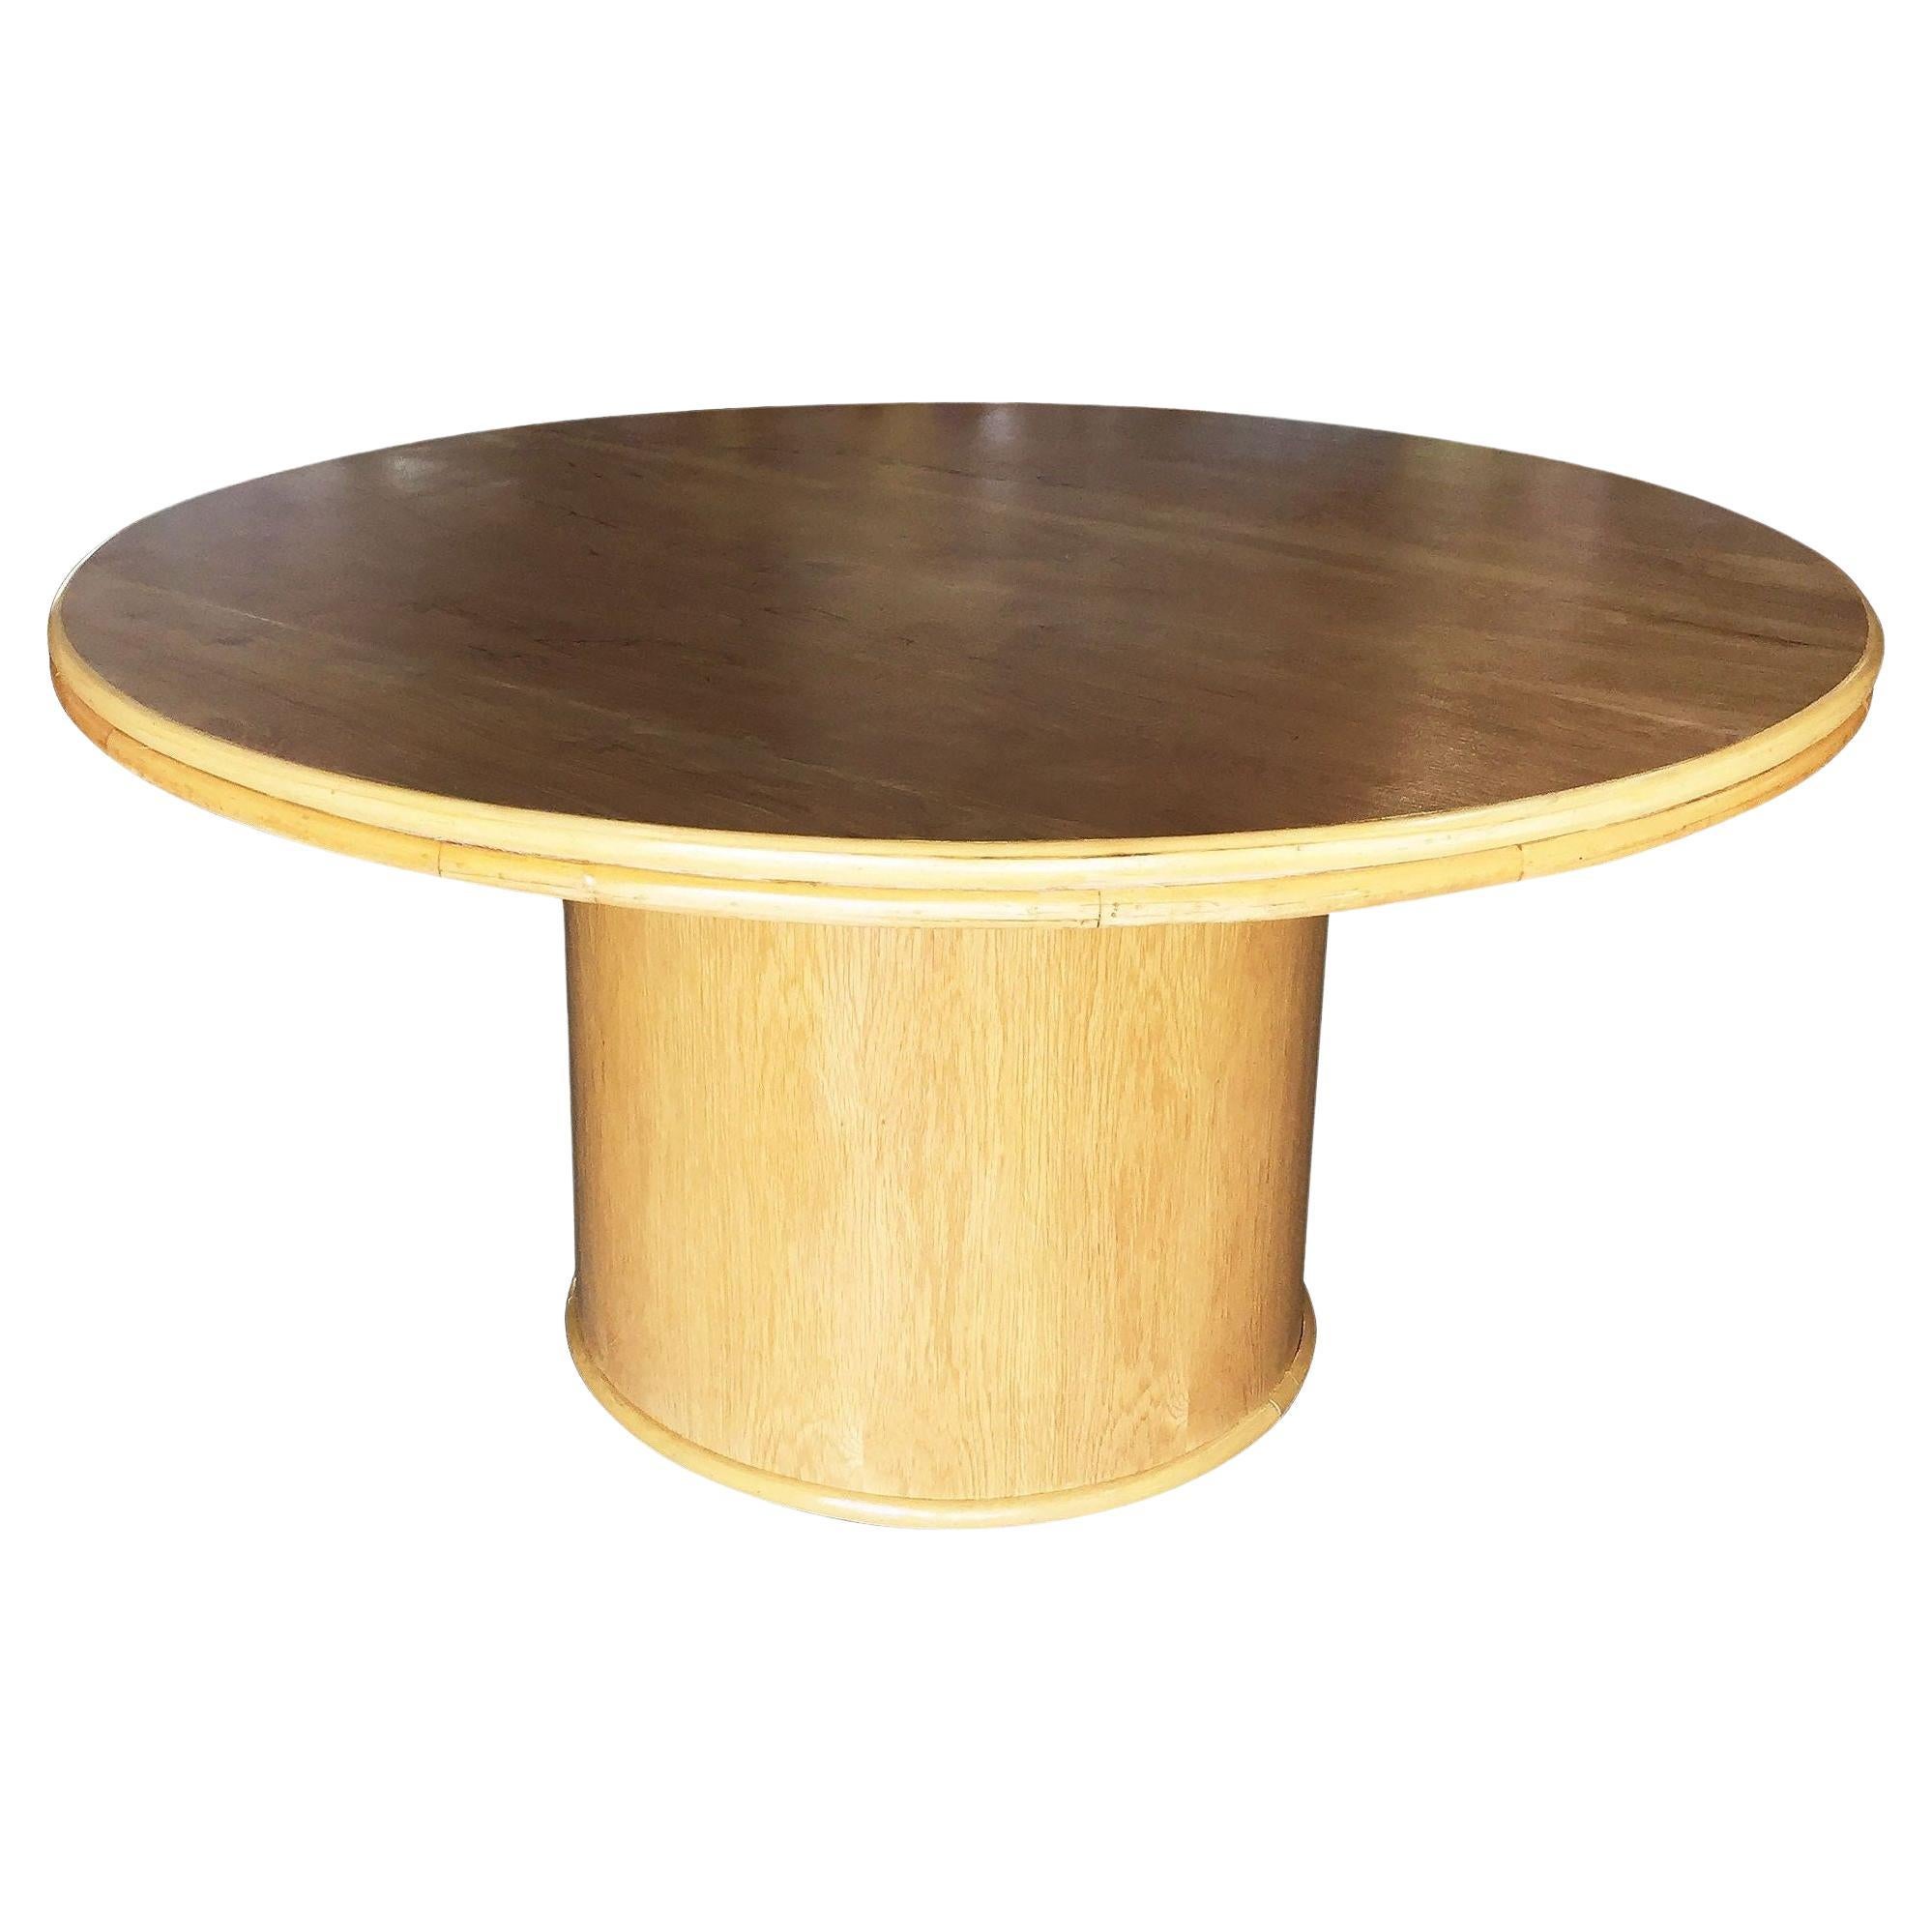 Bentwood Rattan and Oak Round Pedestal Dining Table For Sale